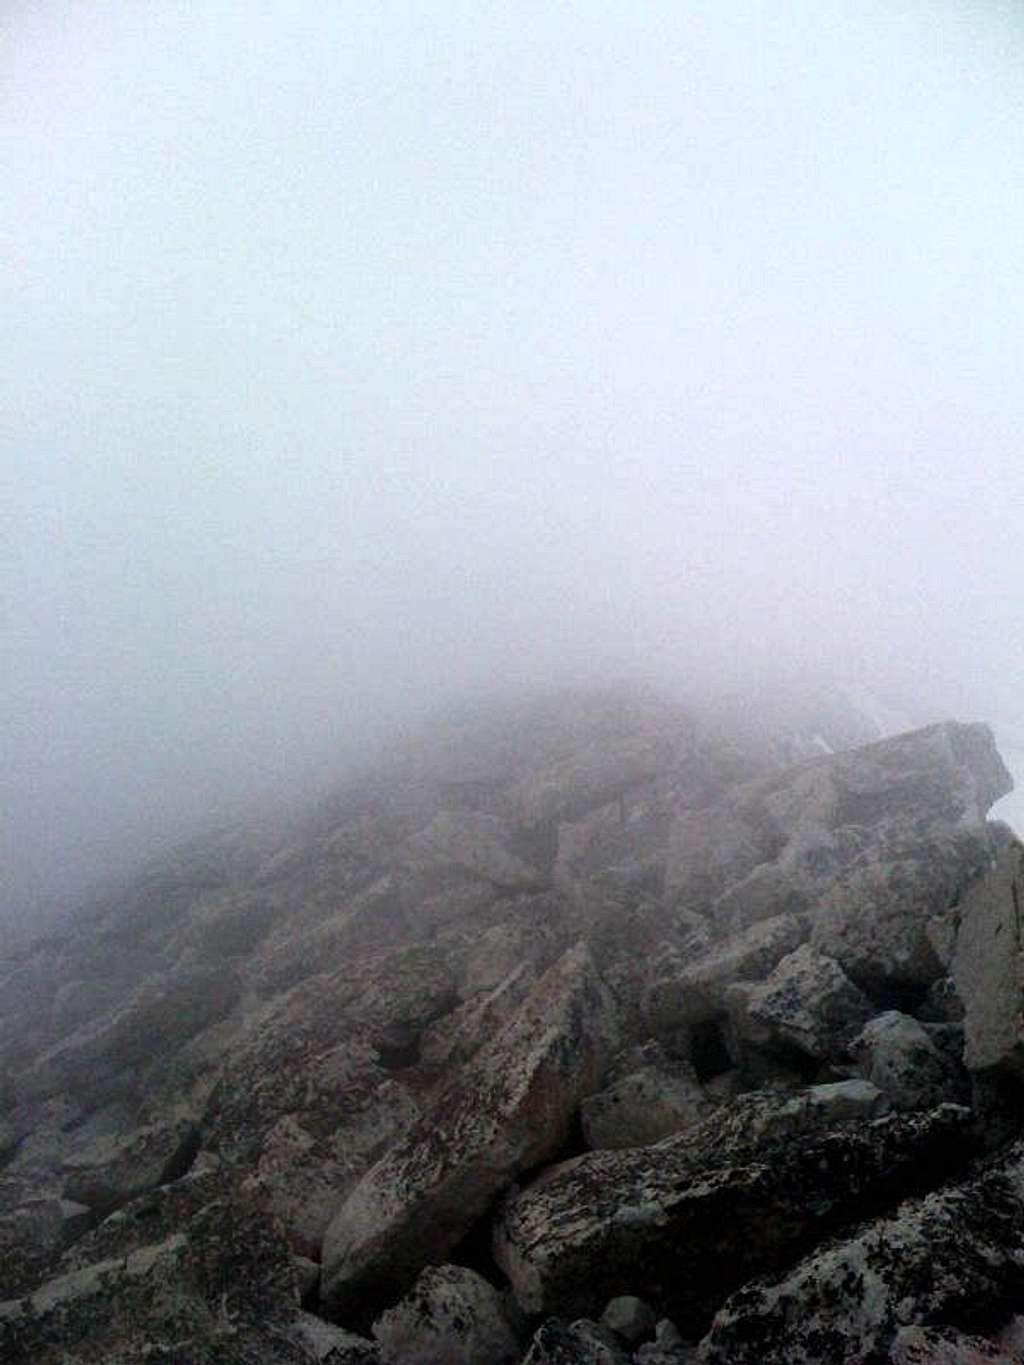 Summit clouded up